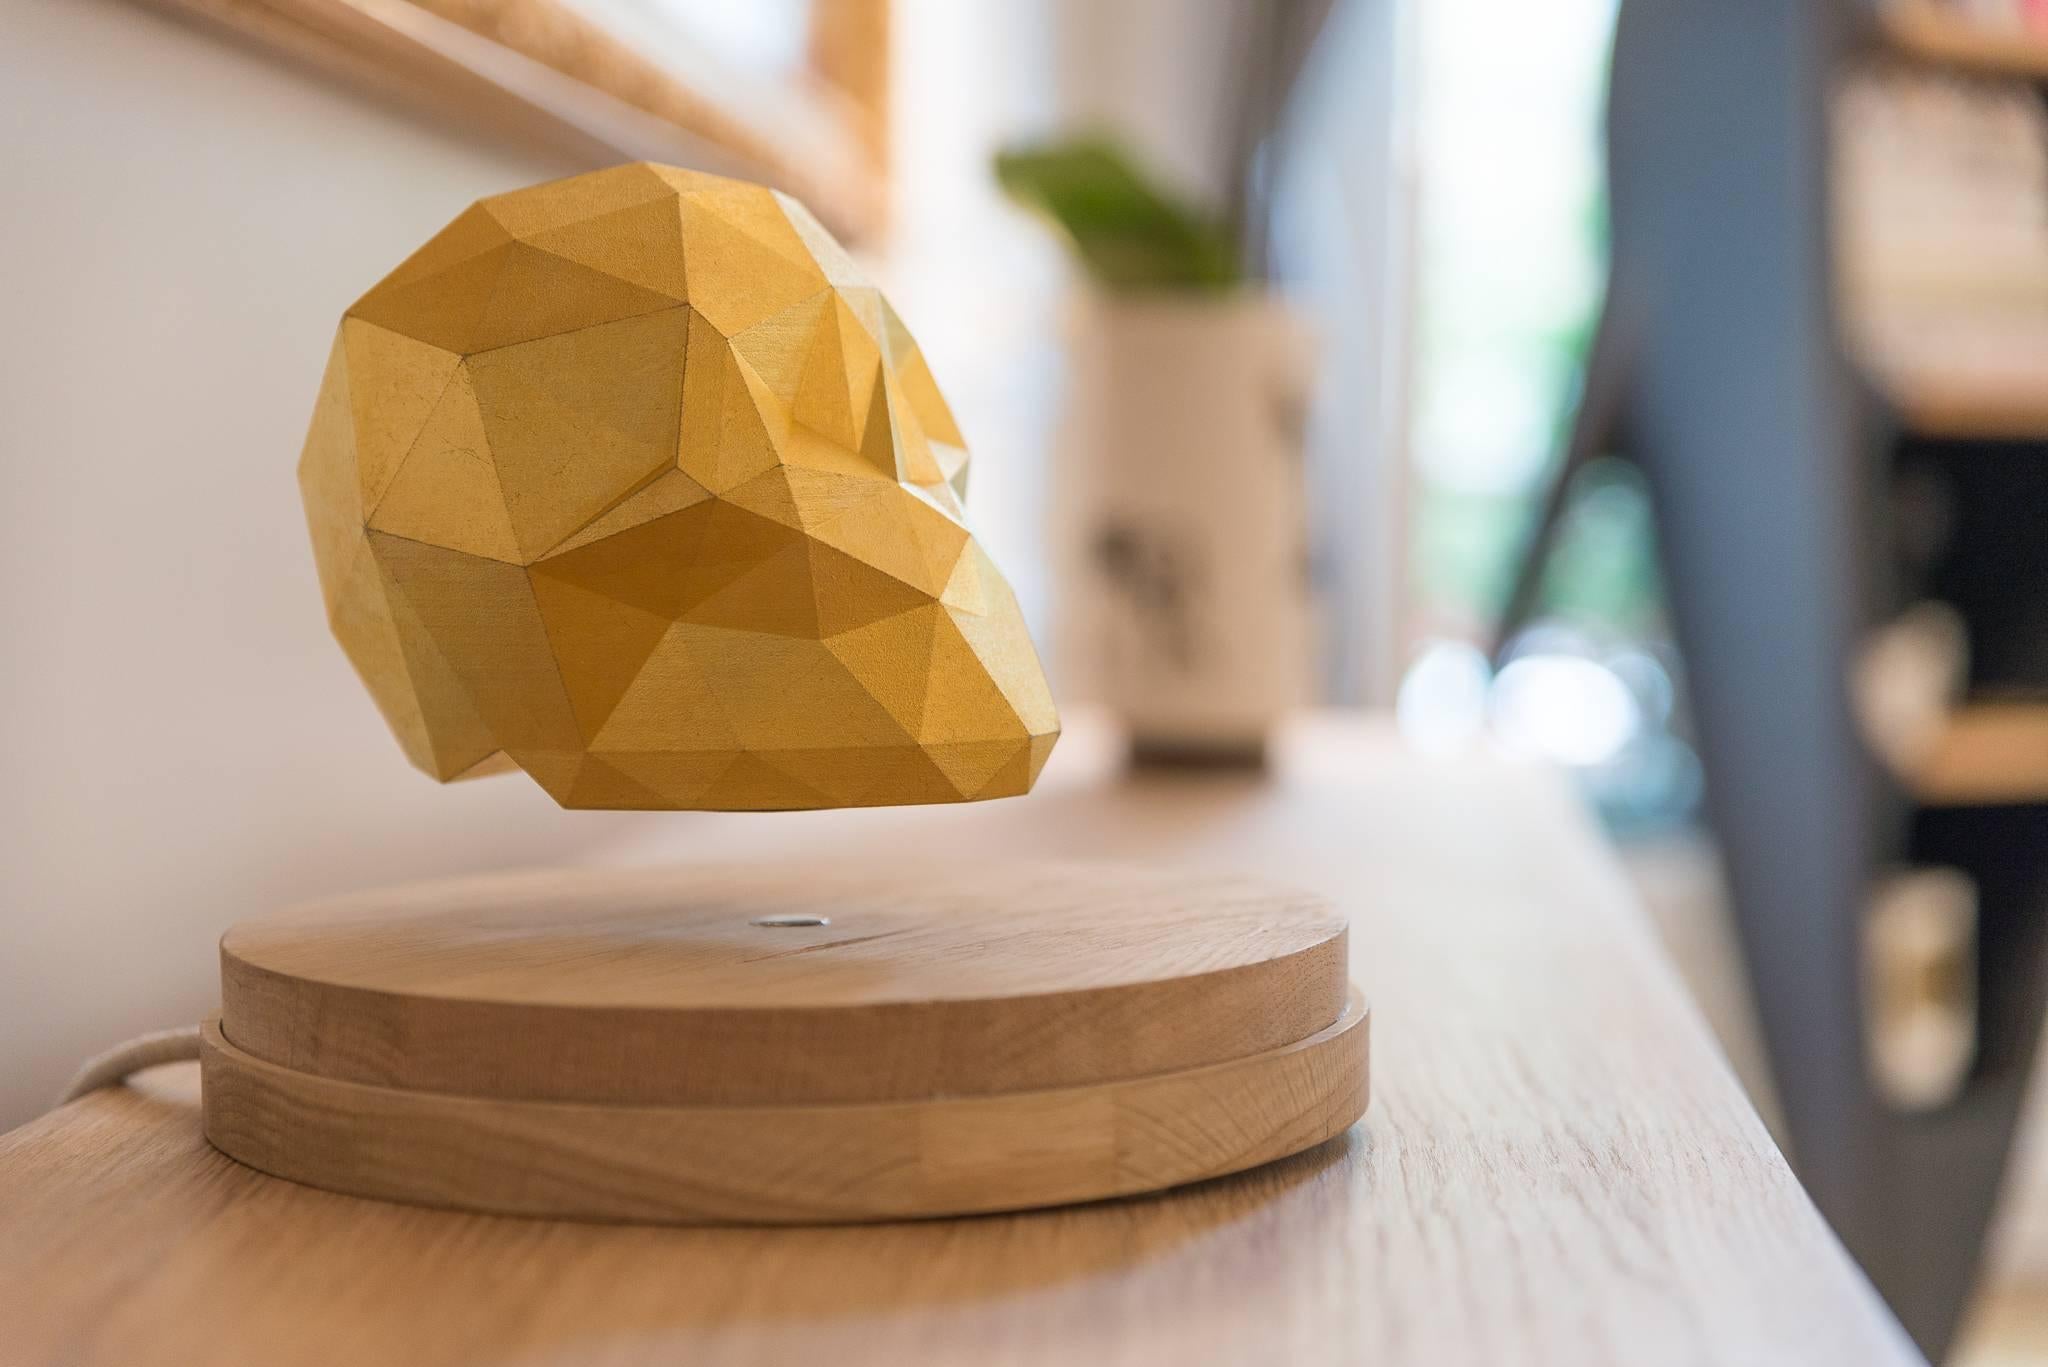 Ankou Gold - levitating 3D printed skull with gold leaves and magnet - Sculpture by GK & AC